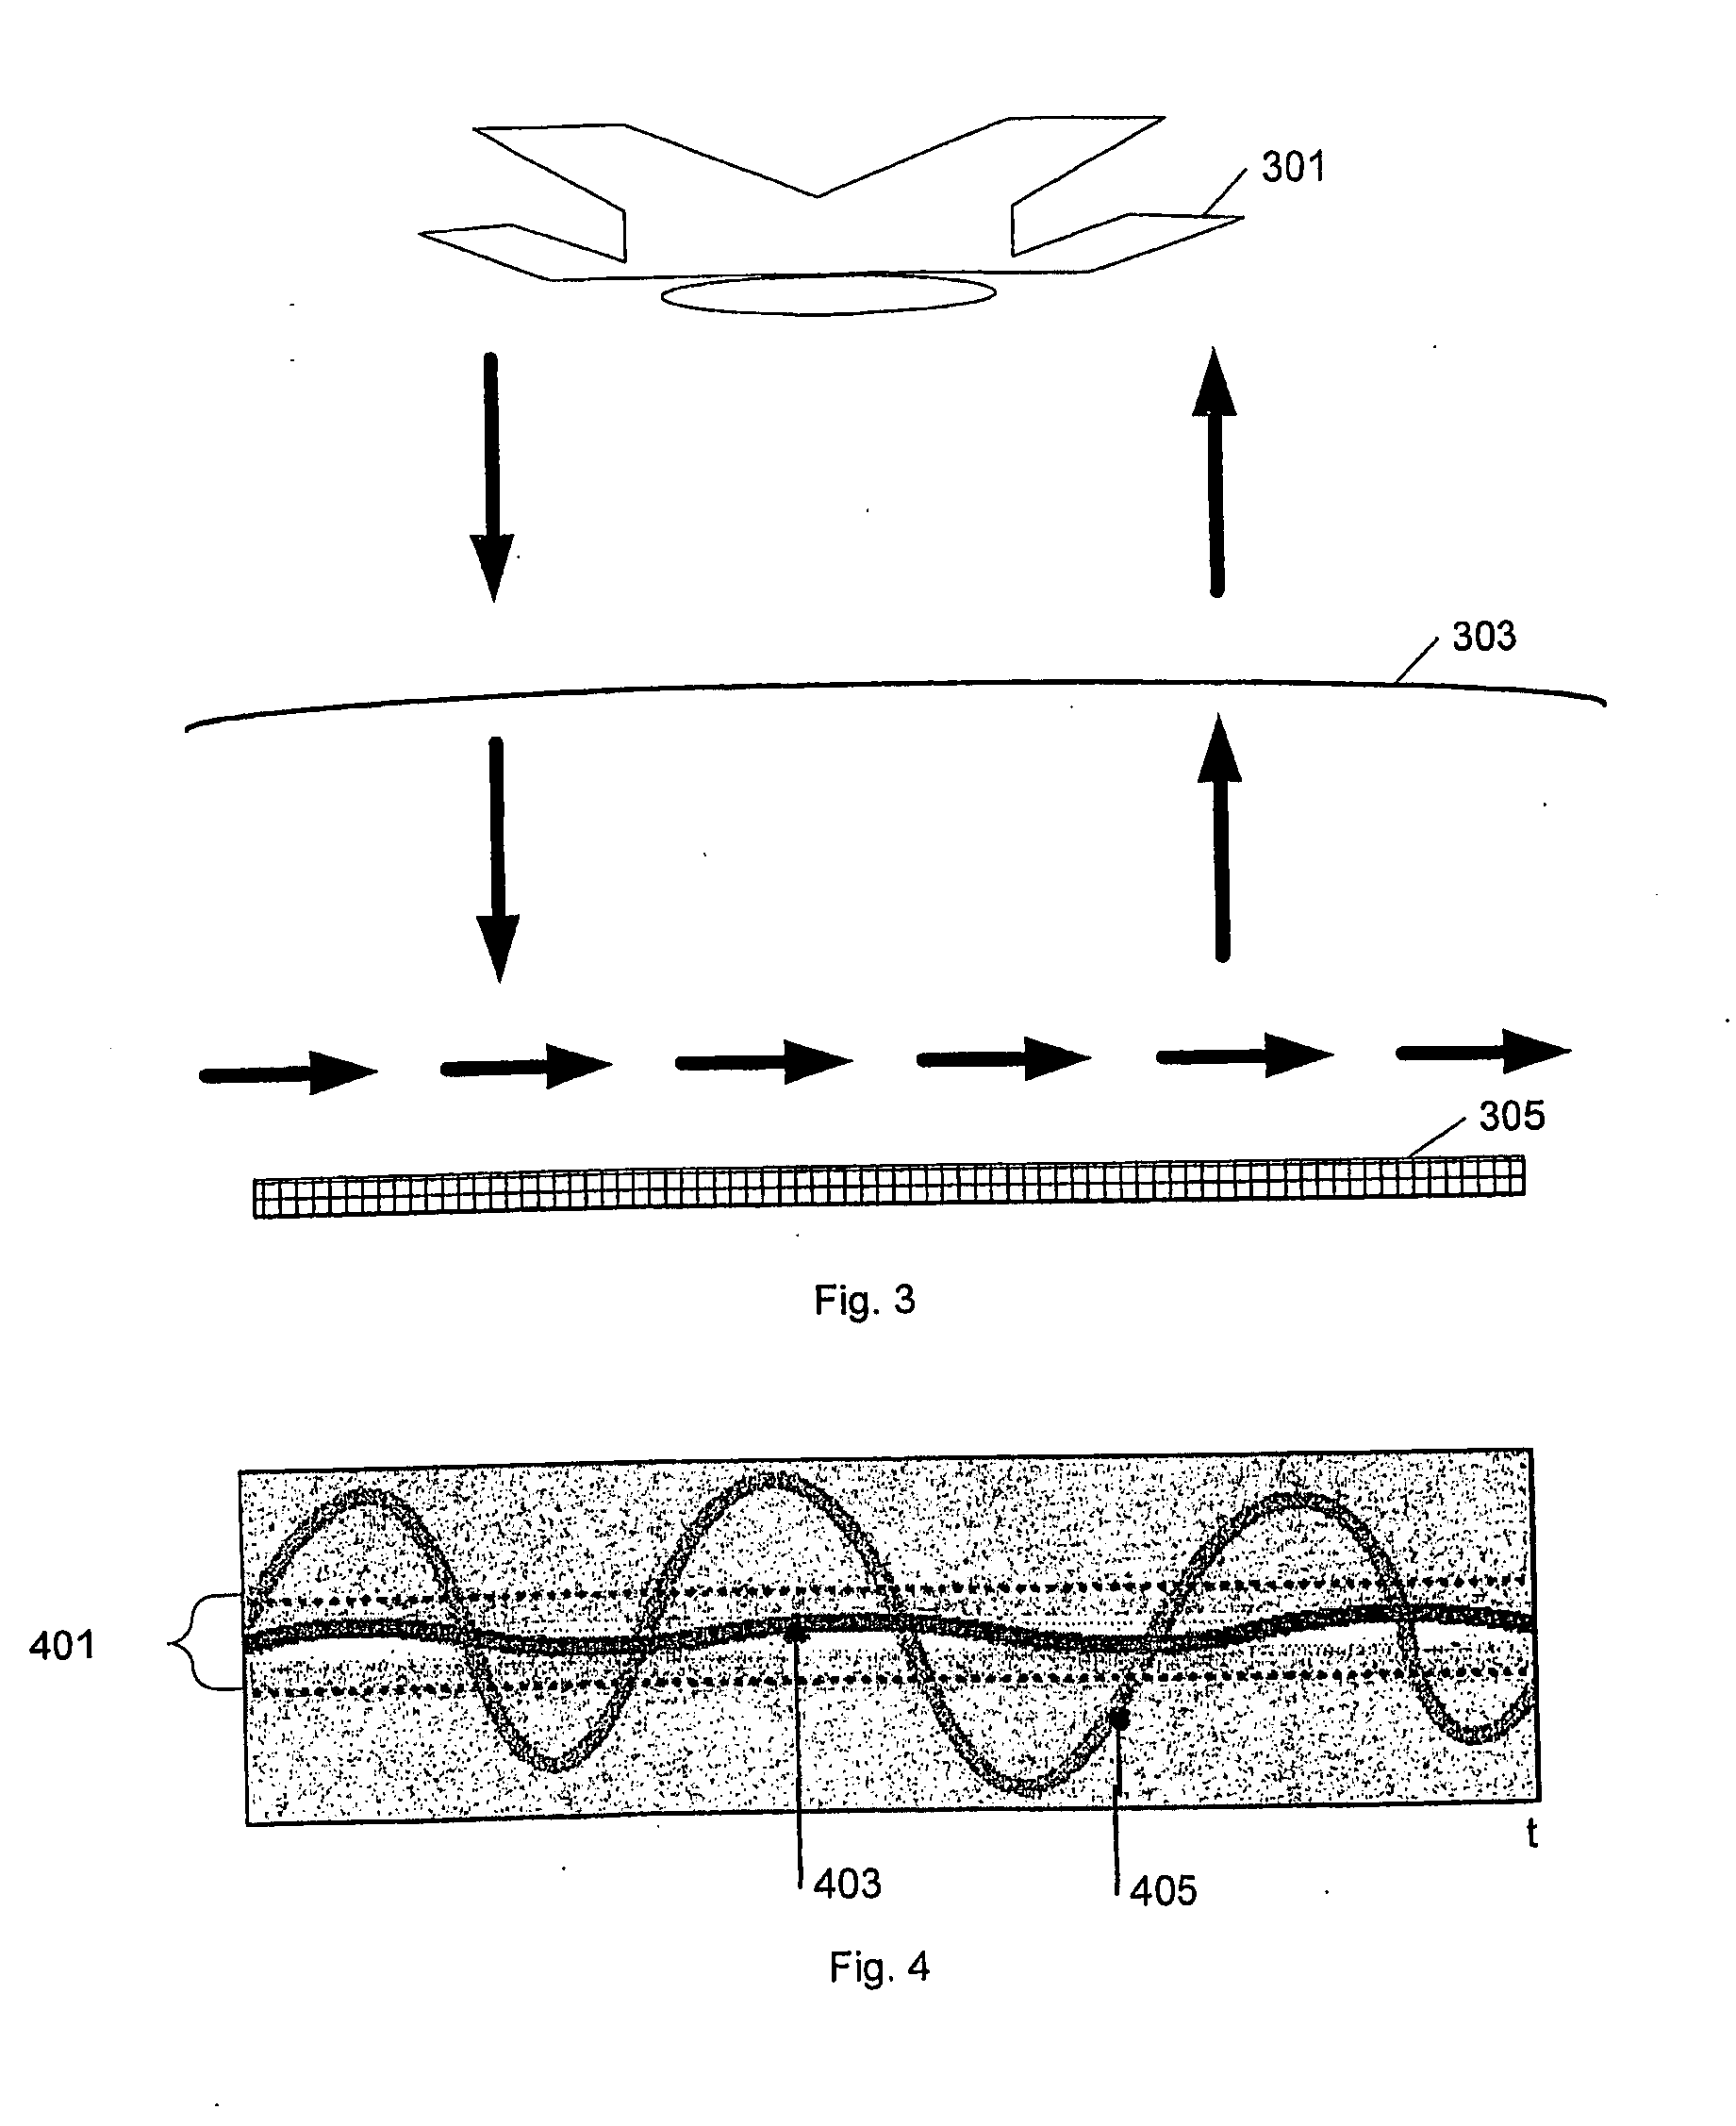 Mattress Comprising An Active Heat Absorbing/Releasing Layer In Combination With A Down Layer